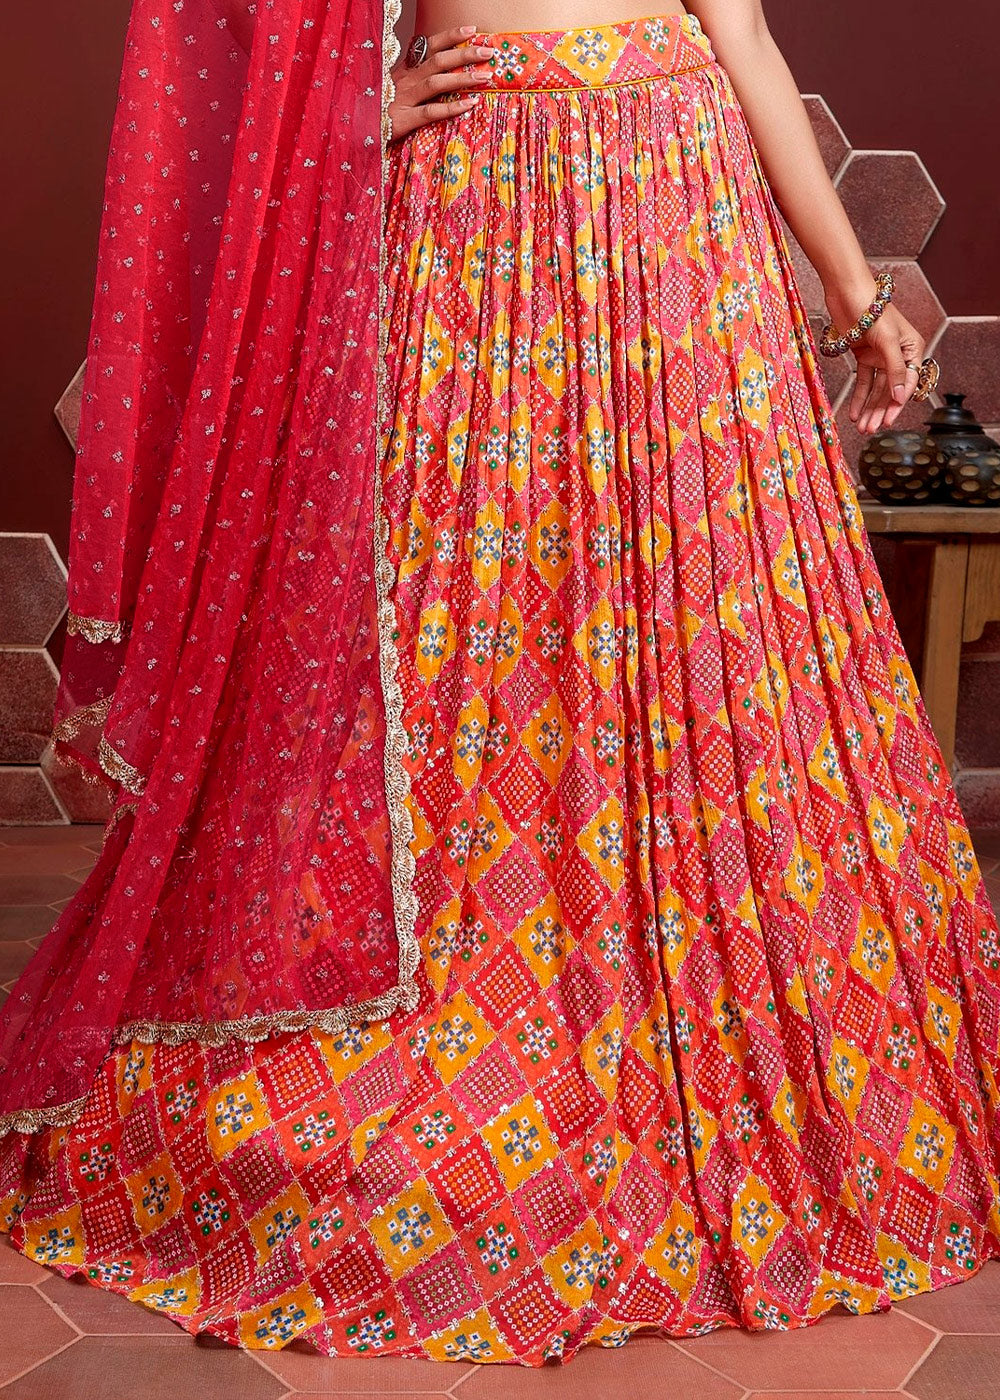 CARROT RED & PINK SILK LEHENGA WITH HEAVY EMBROIDERED BLOUSE